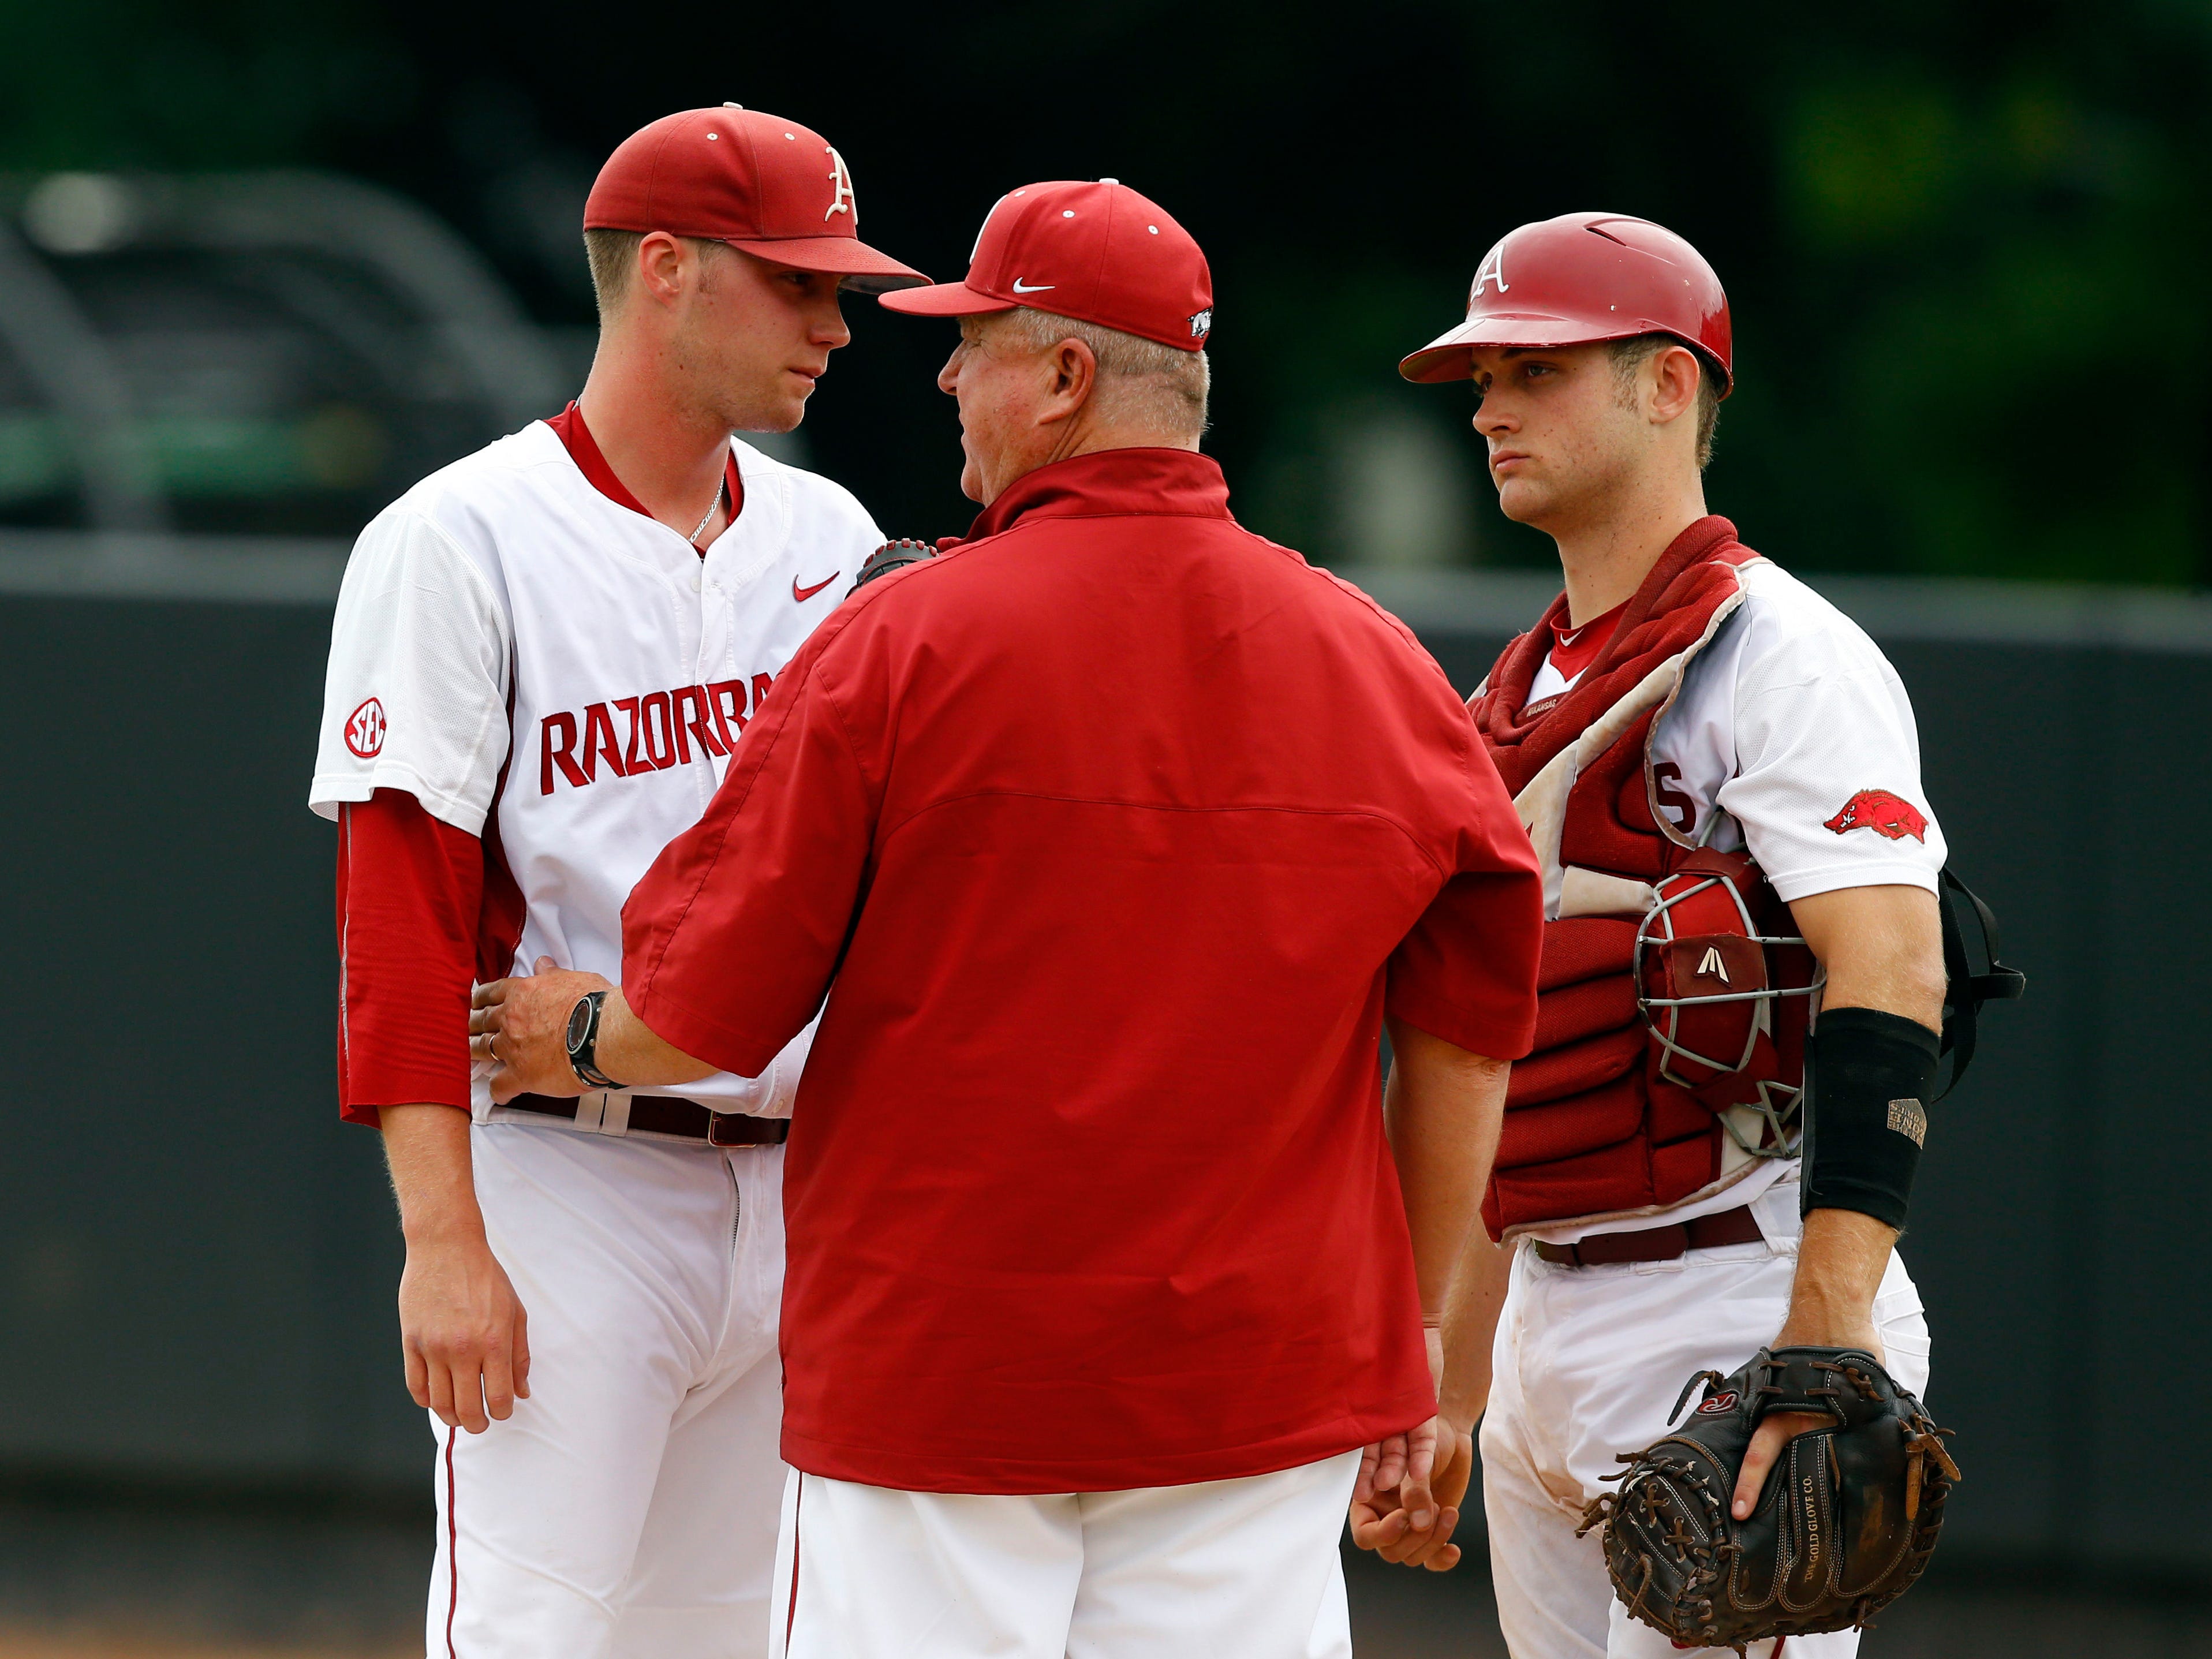 Arkansas pitching coach Dave Jorn, center, talks with starting pitcher Trey Killian and catcher Tucker Pennell in the first inning of a game against Oral Roberts at the Stillwater Regional of the NCAA college baseball tournament in Stillwater, Okla., Friday, May 29, 2015. (AP Photo/Sue Ogrocki)